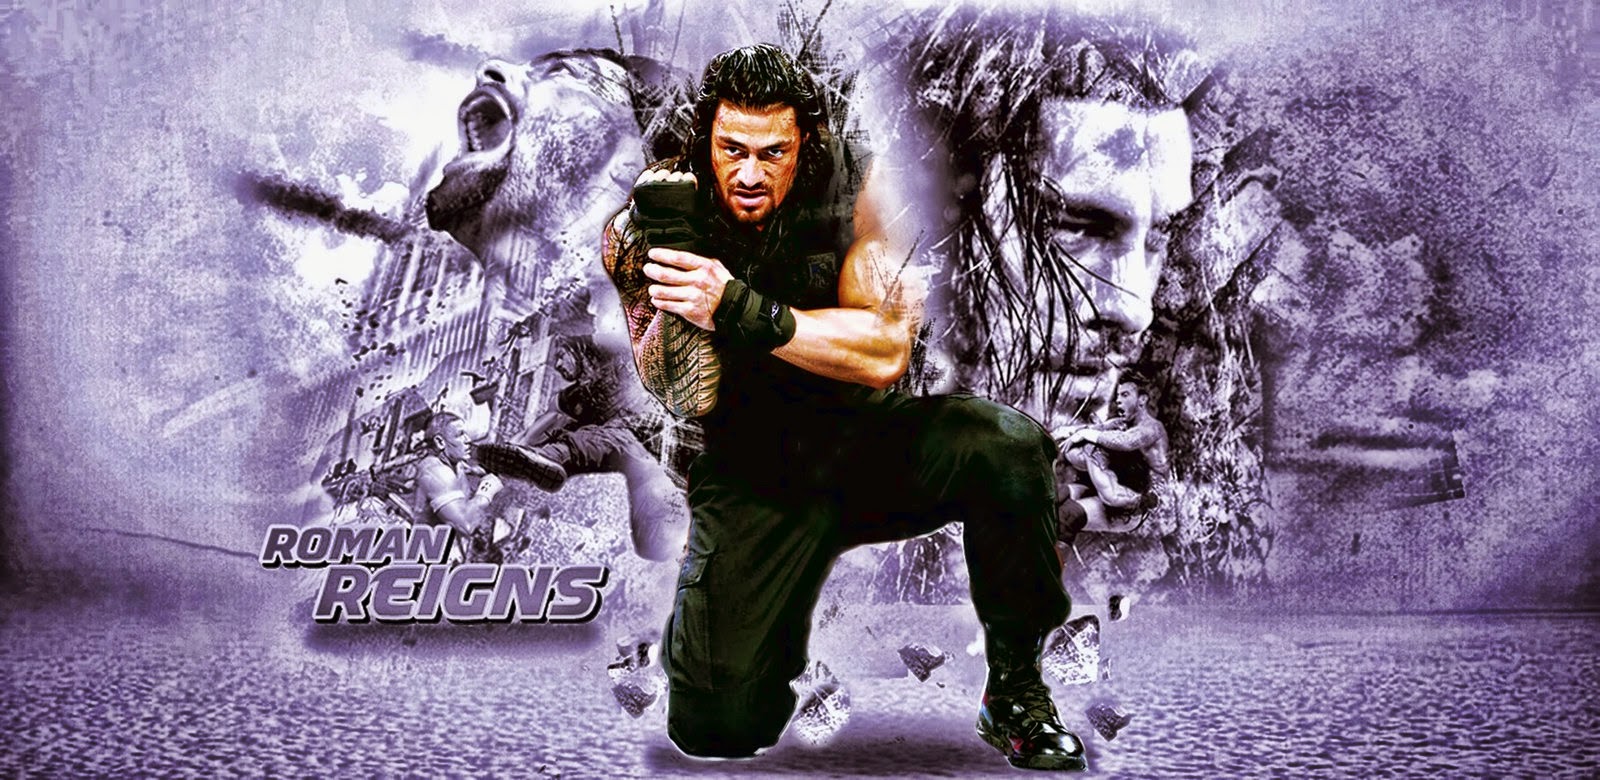 roman reigns wallpapers free download wwe wallpapers wwe images wwe wallpapers free download wwe superstars wallpapers